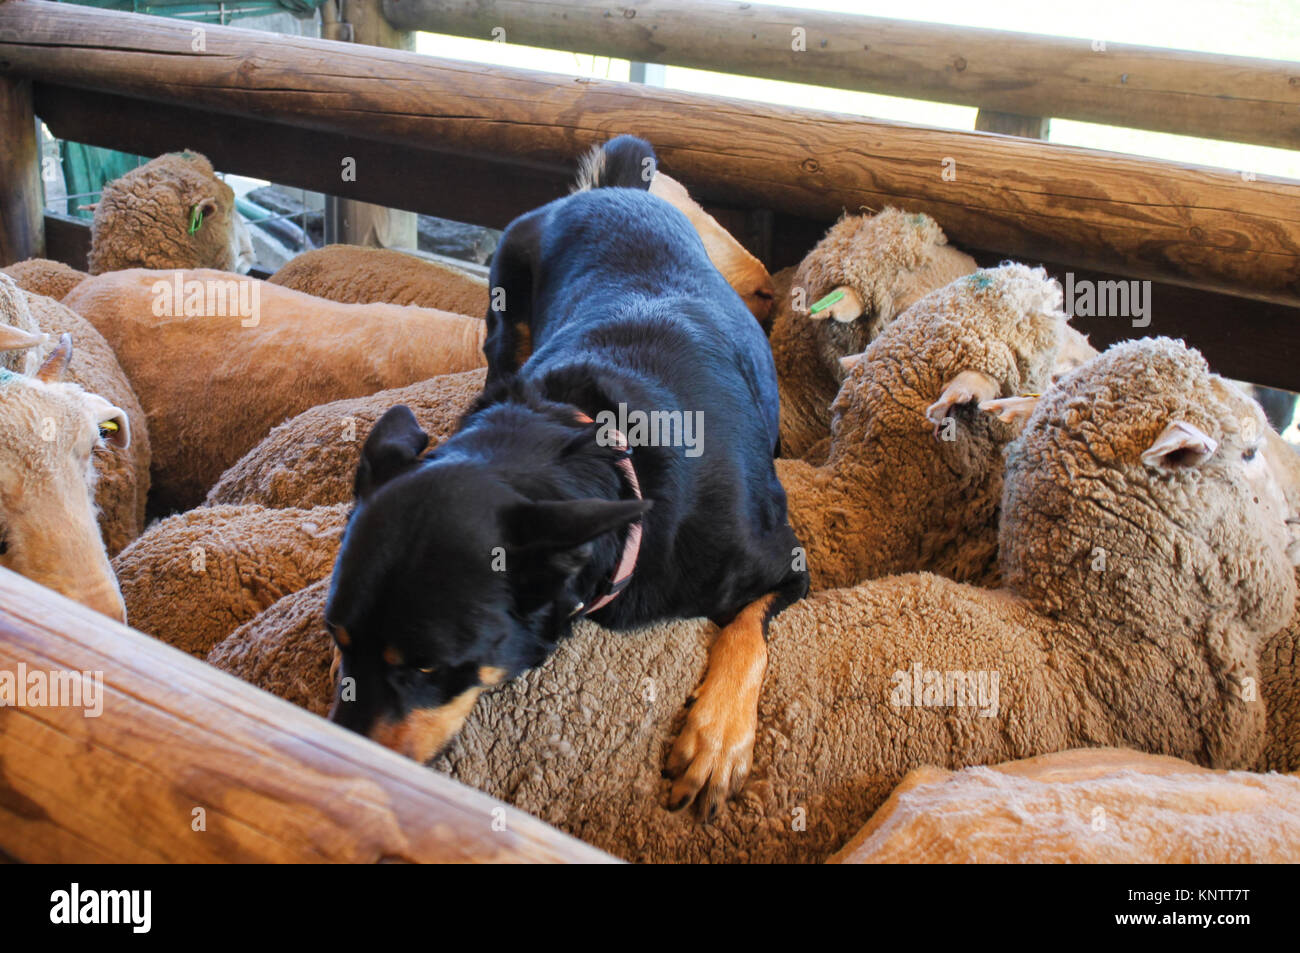 A proud sheepdog crouches on the back of the sheep he just coralled in a wooden pen in Australia Stock Photo